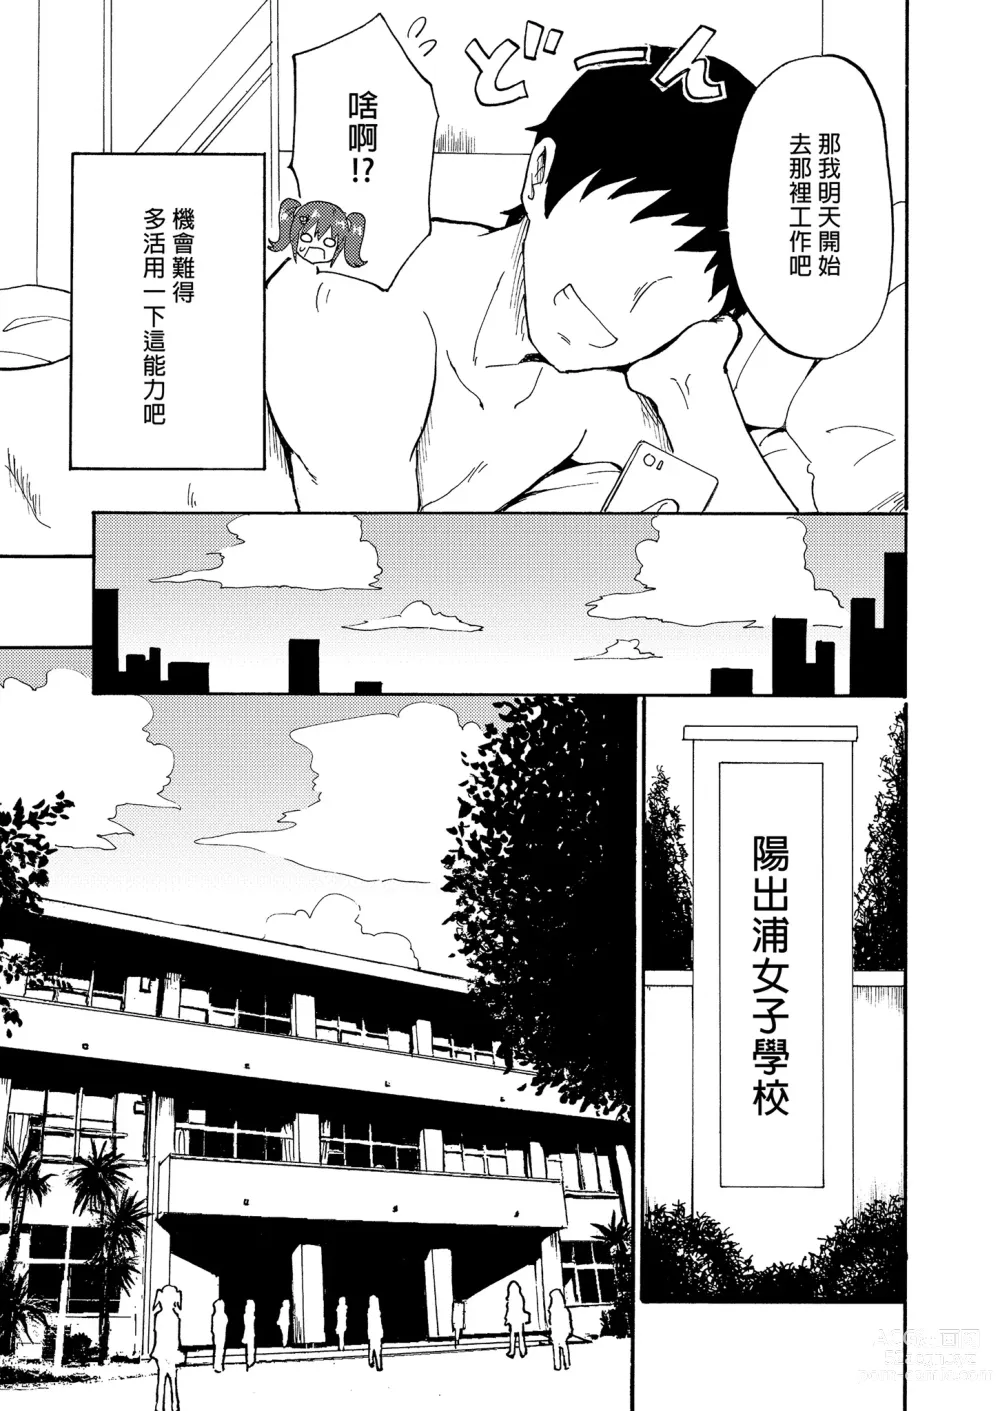 Page 9 of doujinshi _セックススマートフォン～ハーレム学園編総集編～